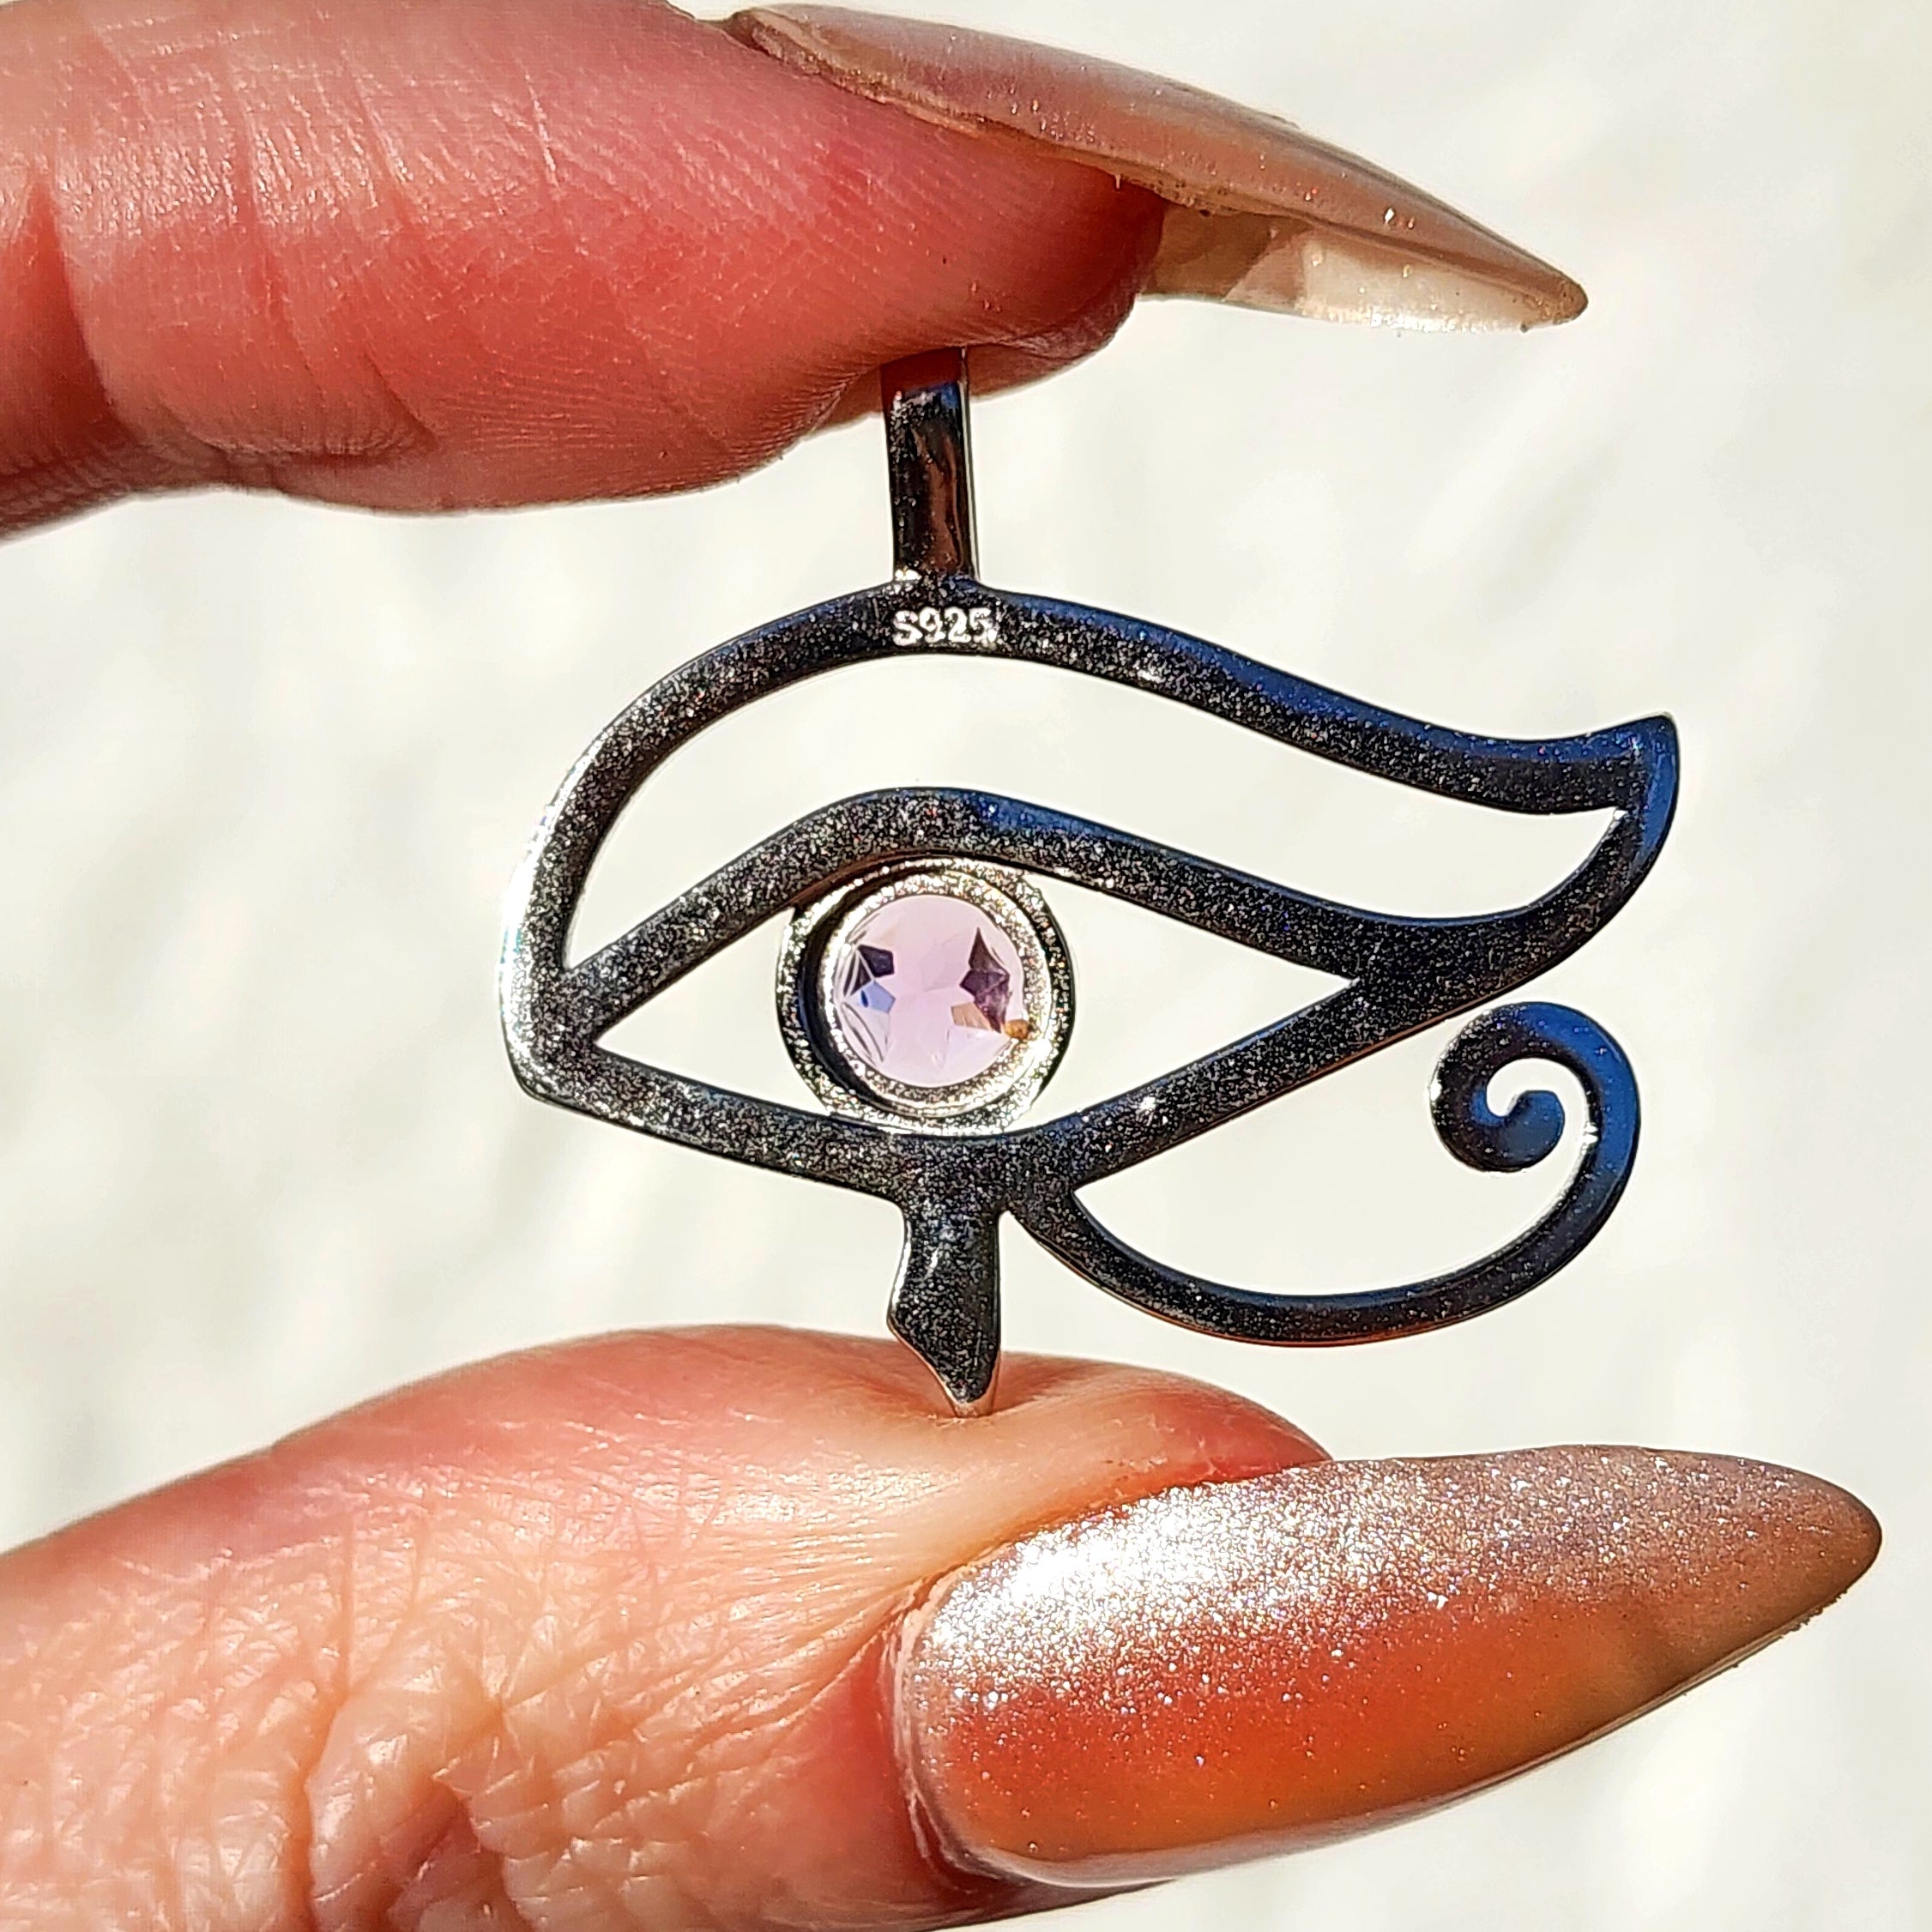 Amethyst Eye of Ra Amulet Pendant .925 Silver for Intuition, Luck, Protection and Purification